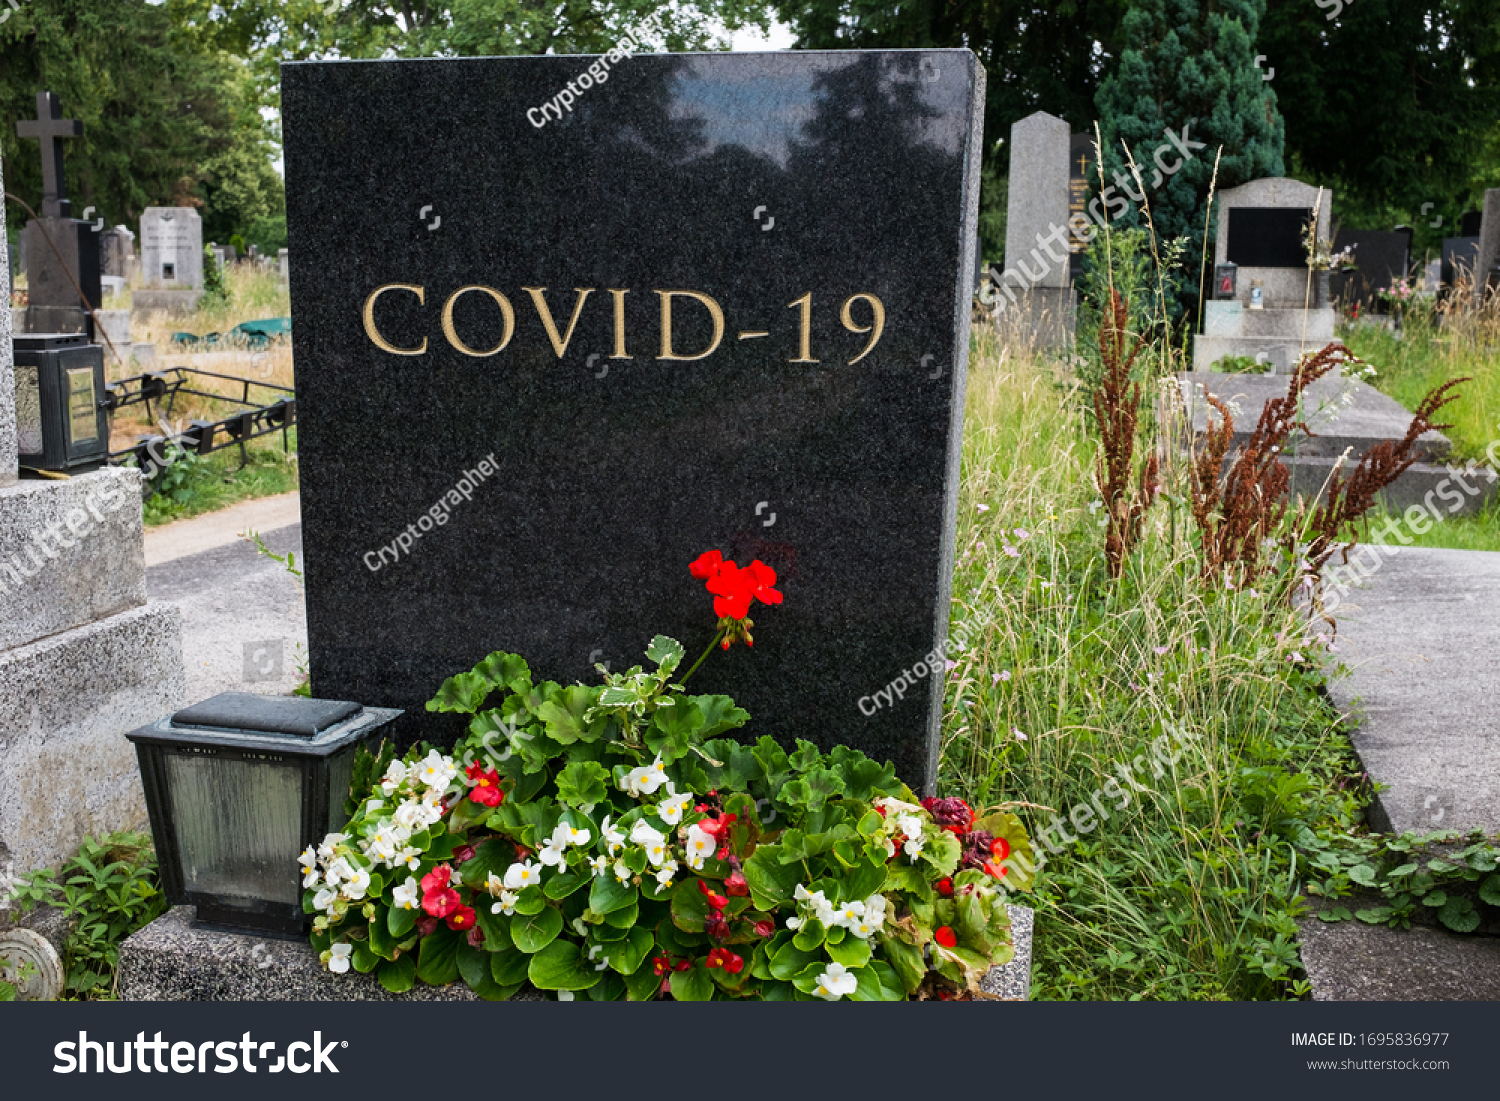 Graveyard cemetery black granite headstone with COVID-19 letters carved in, Coronavirus pandemic crisis taking many lives, deadly virus death toll rising, high mortality rate, acute pneumonia victims #1695836977